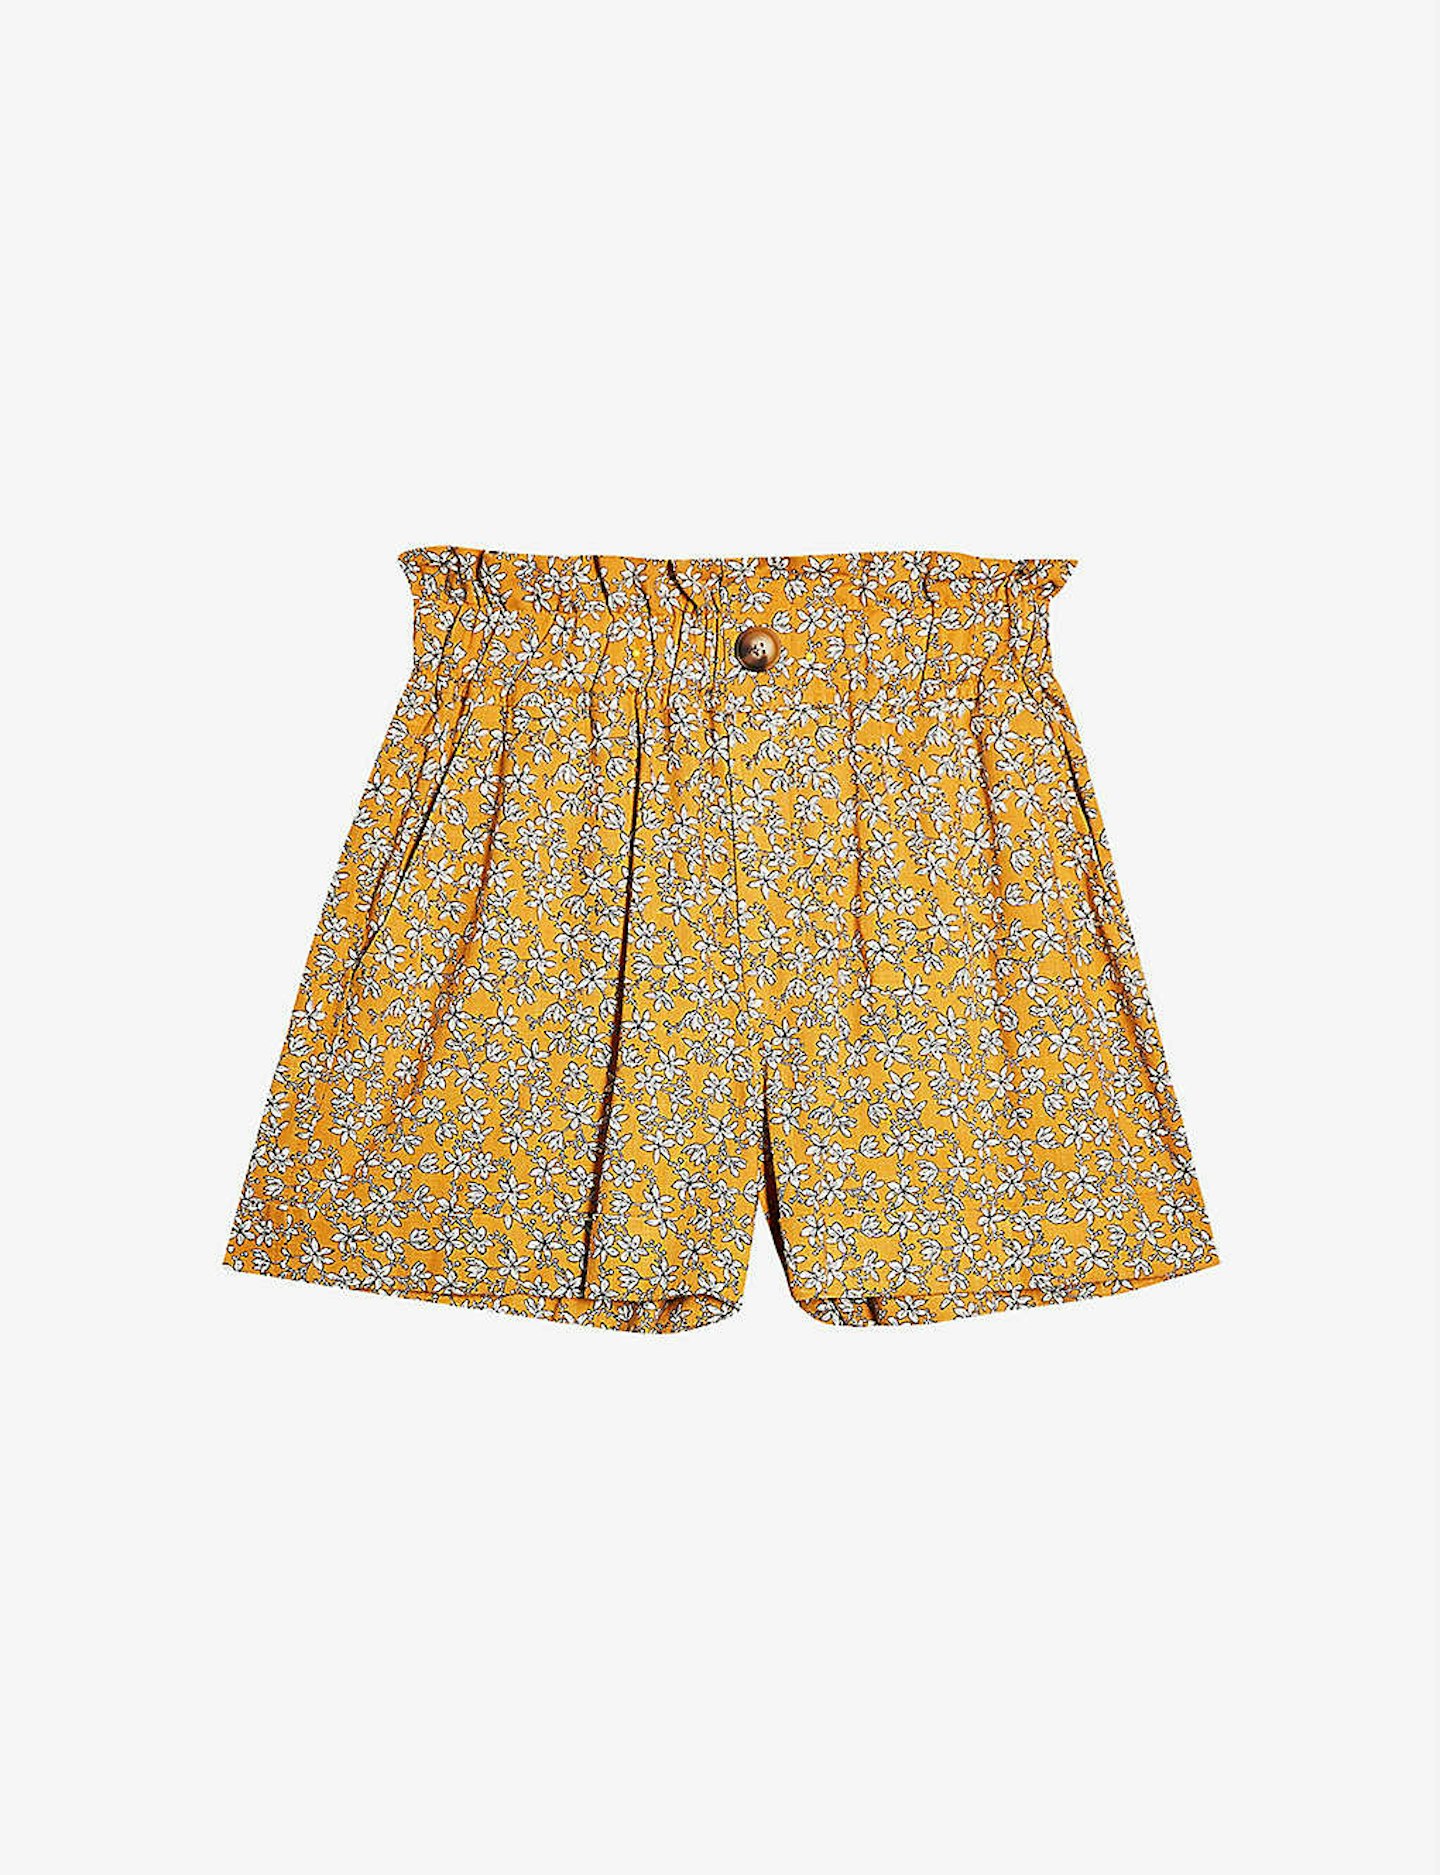 Topshop, Floral Paperbag Turn-Up Woven Shorts, £15